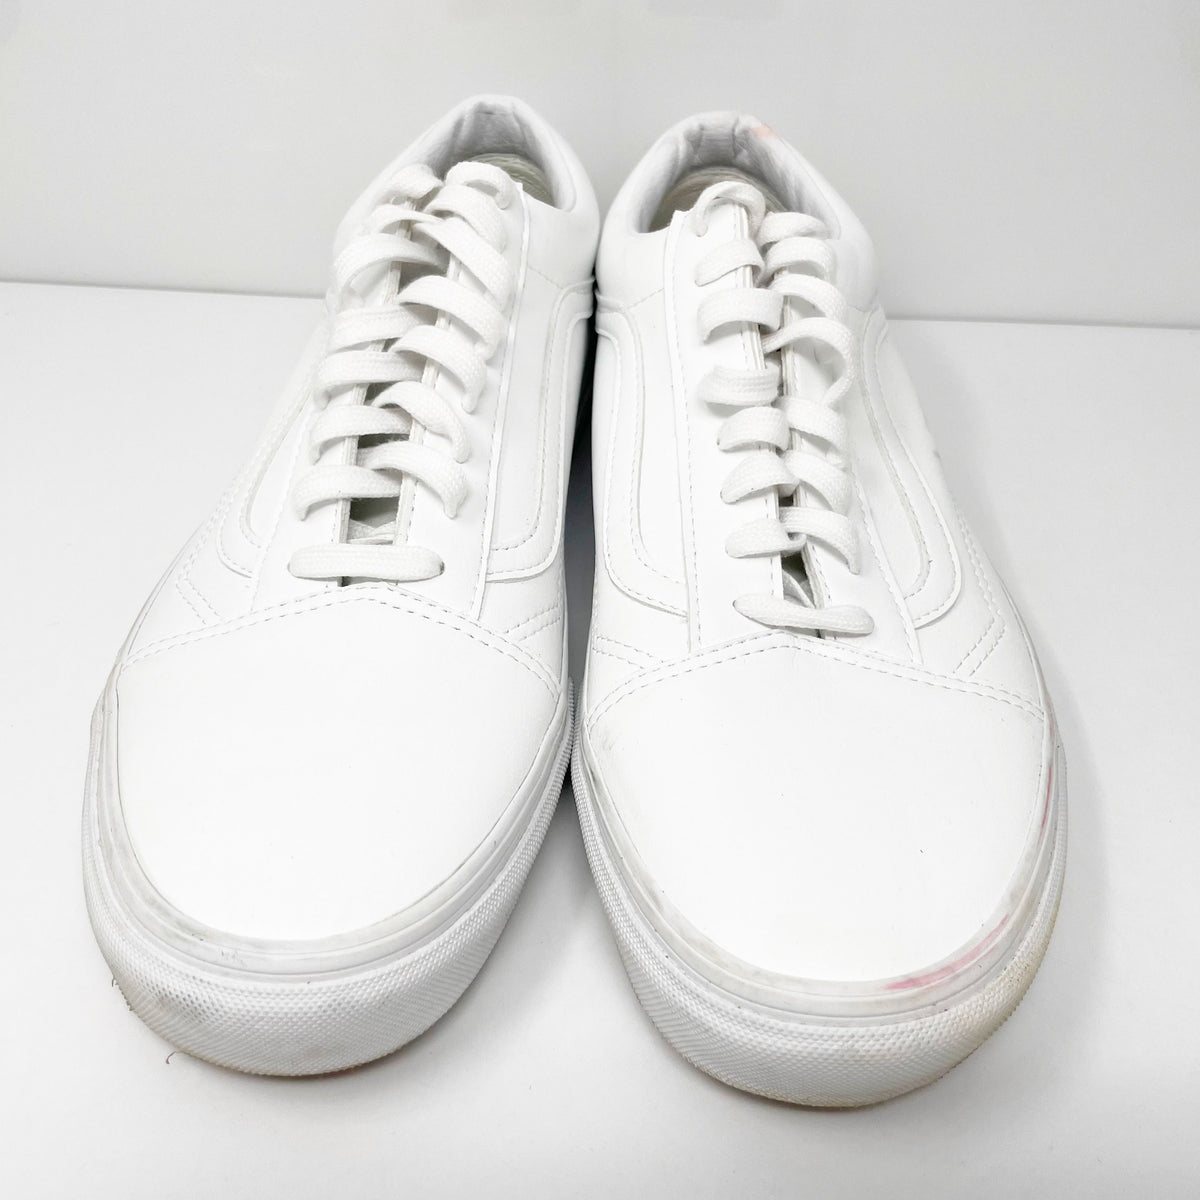 Vans Mens Off The Wall 507452 White Casual Shoes Sneakers Size 12 ...